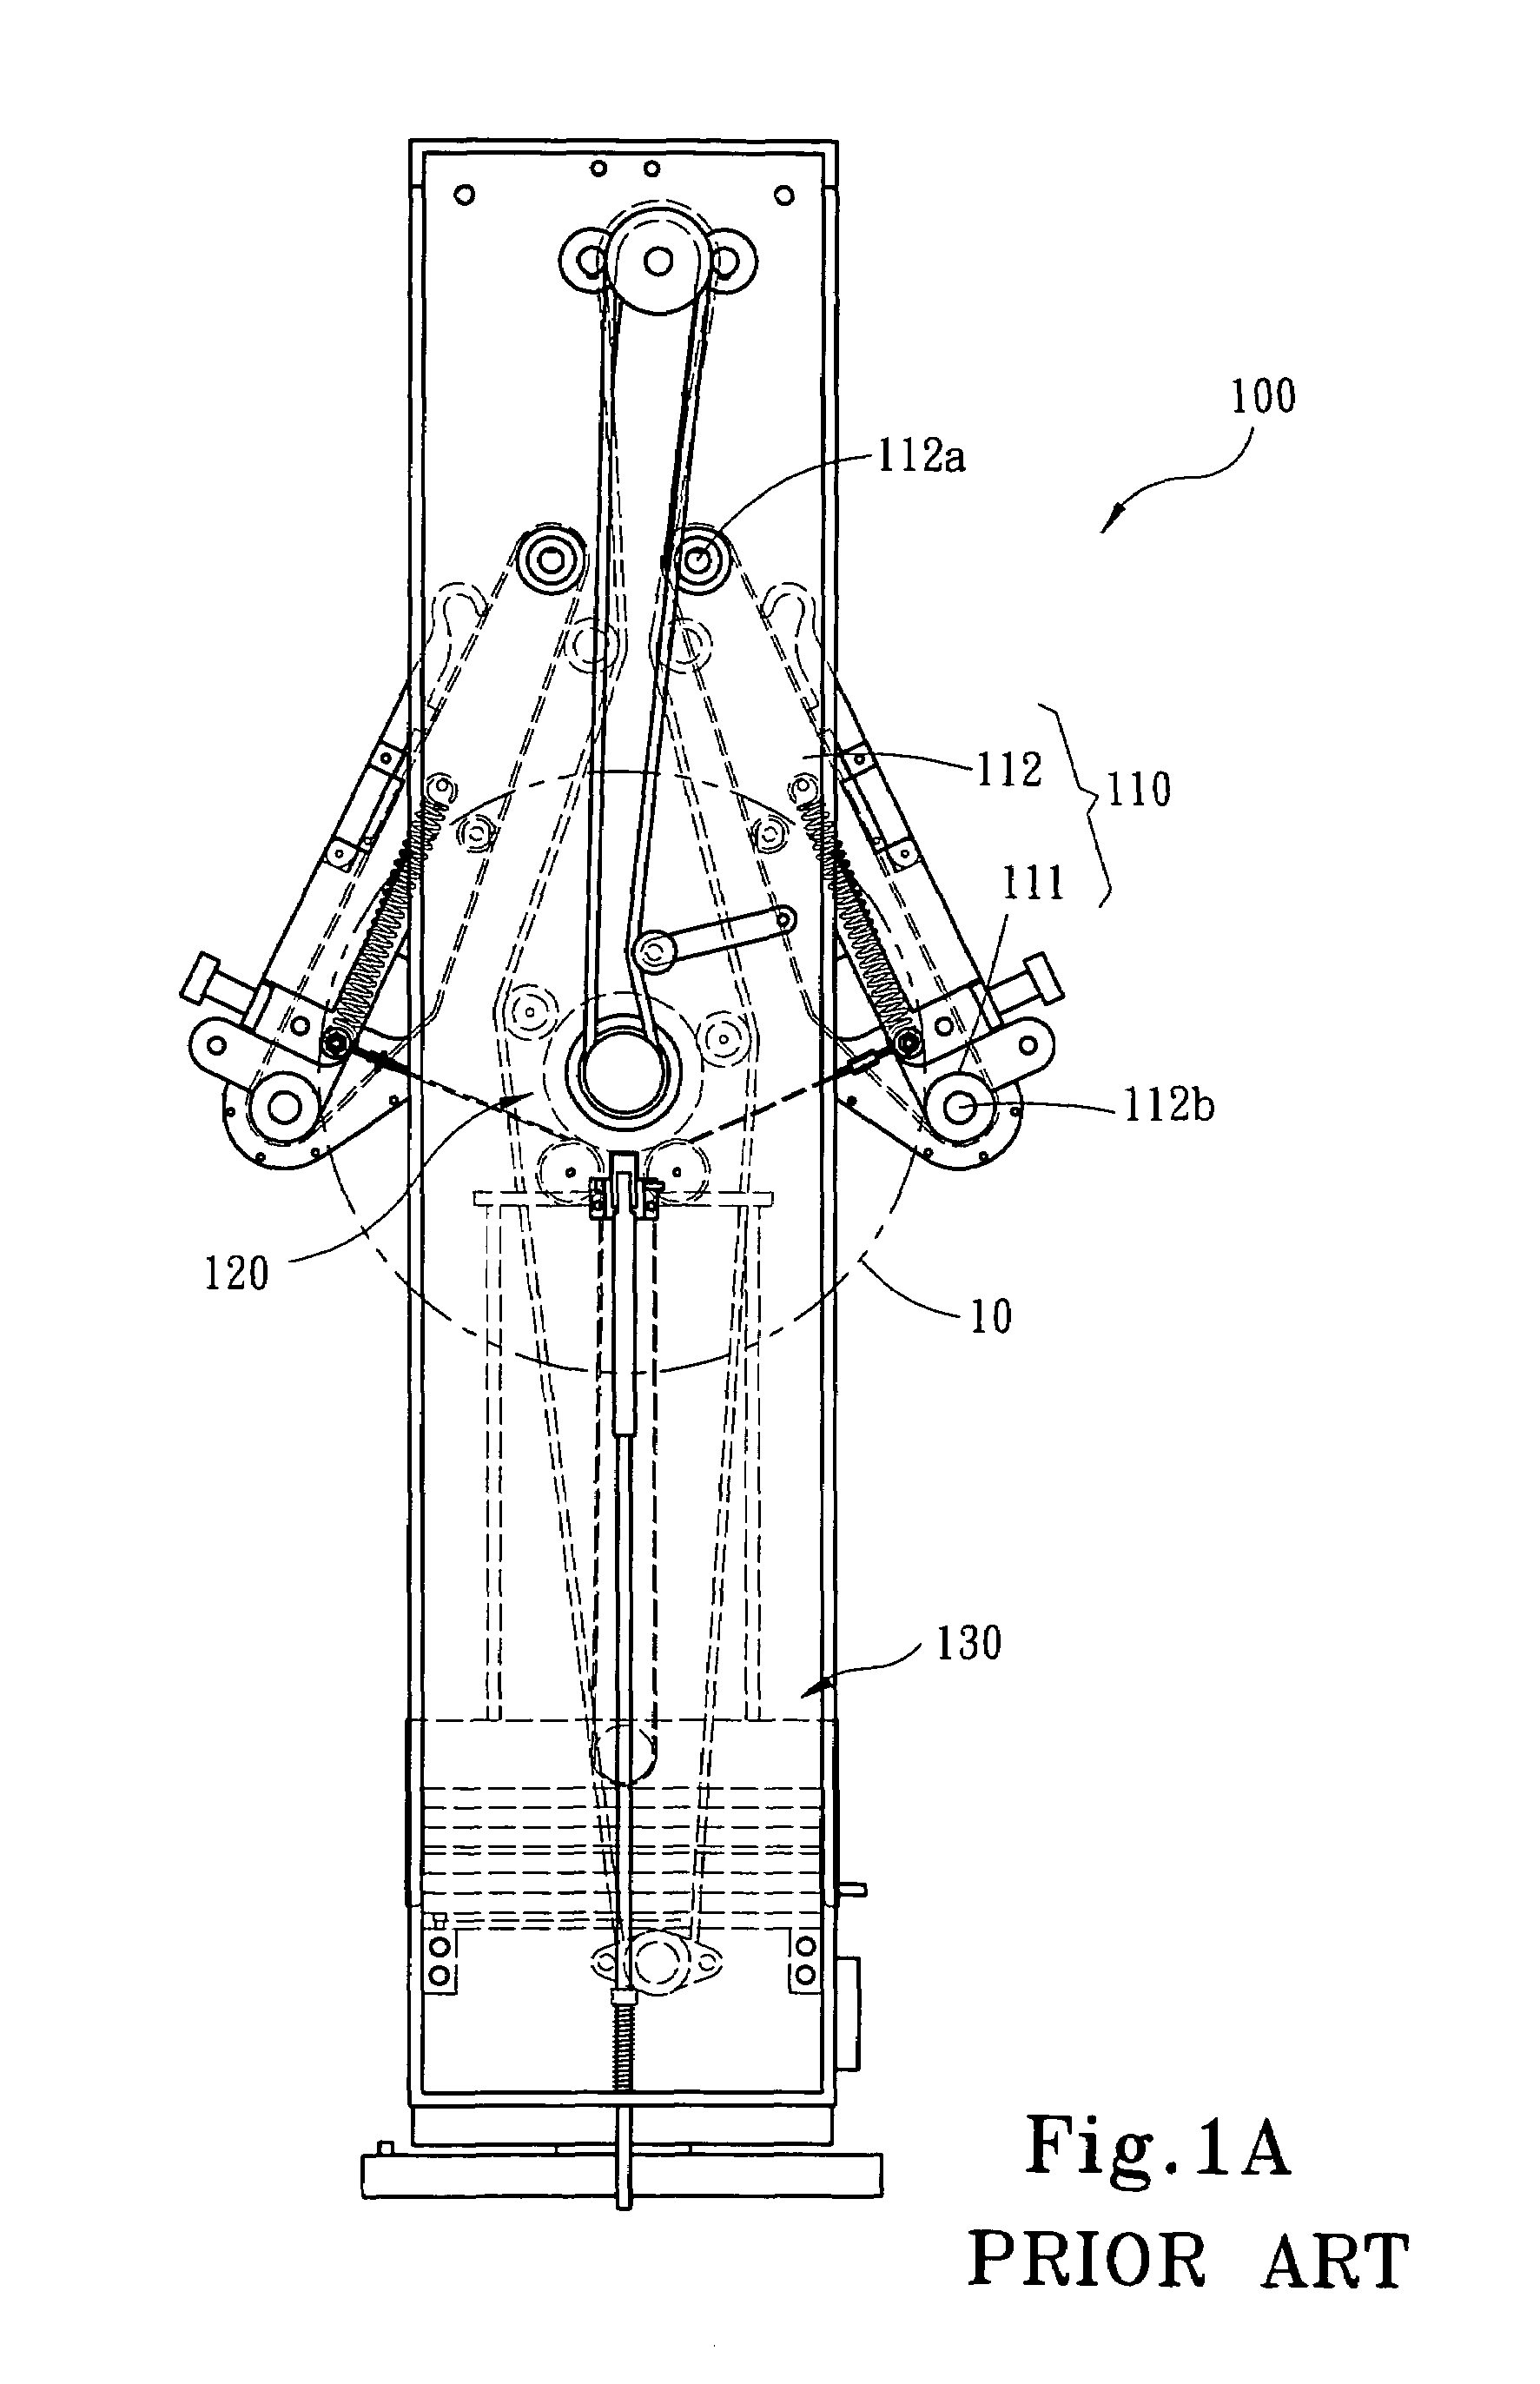 High-speed high-stand fabric take-up device with uniform fabric tautness arrangement